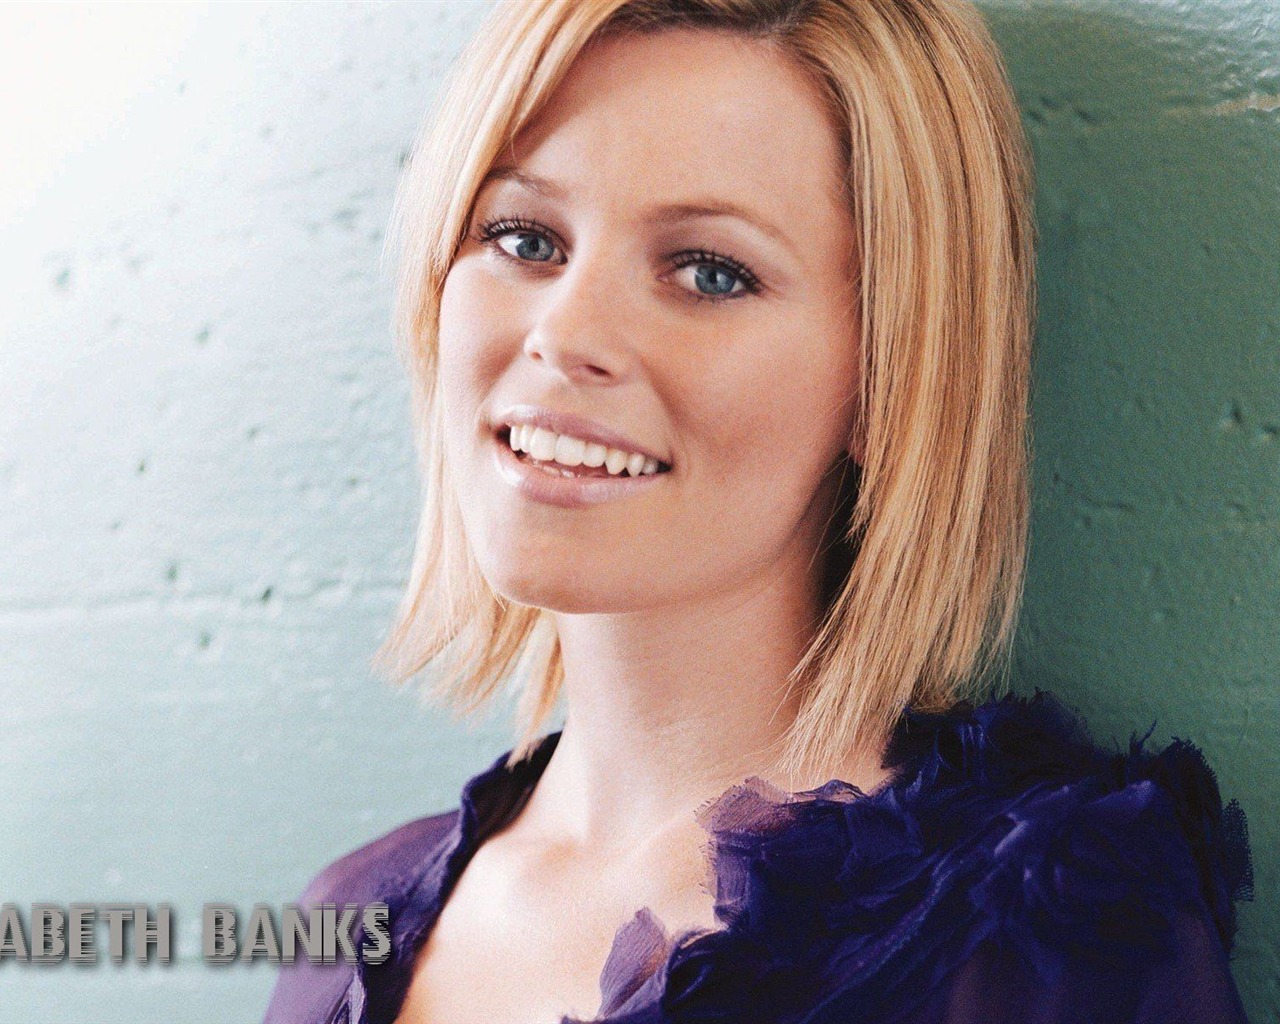 Elizabeth Banks #001 - 1280x1024 Wallpapers Pictures Photos Images